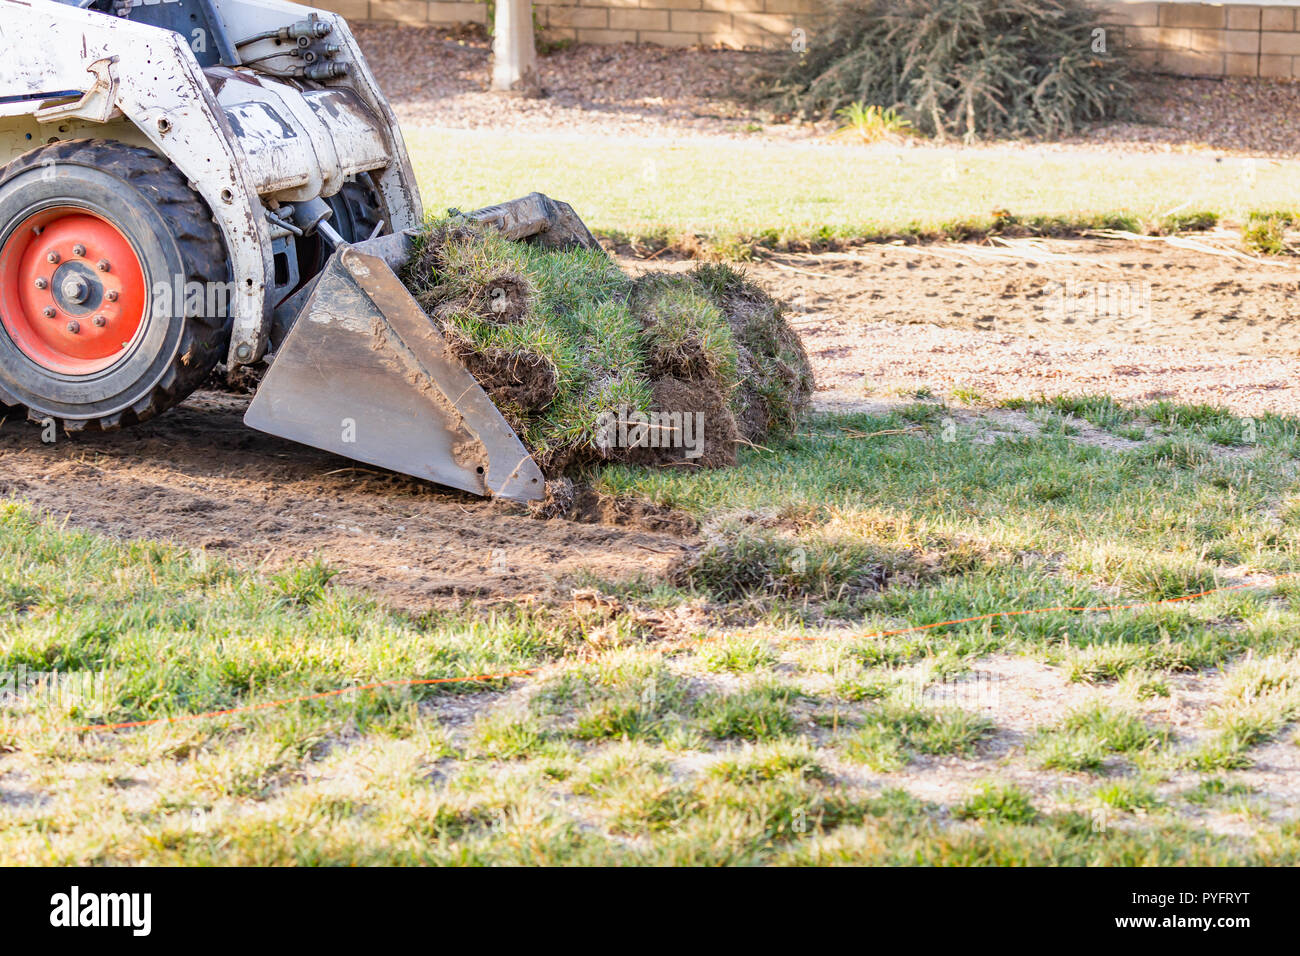 Small Bulldozer Removing Grass From Yard Preparing For Pool Installation  Stock Photo - Alamy